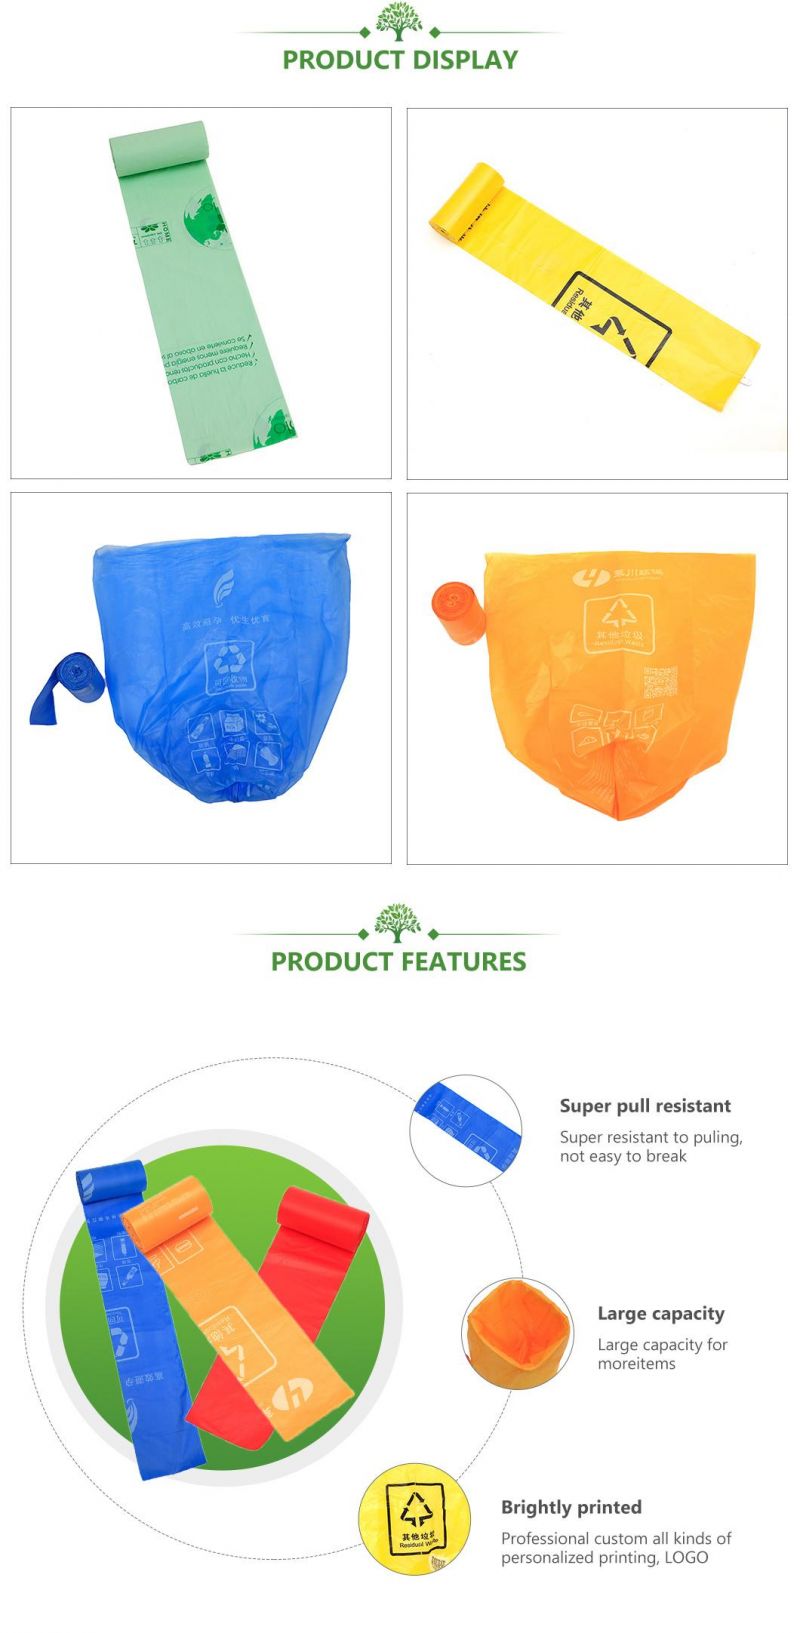 100% Biodegradable and Compostable Waste Rubbish Bags Manufacturer with Brc, BSCI,CE, Grs,Bpi,FDA,Seeding,Ok Compost Home, Ok Compost Industrial,Seeding Certifi